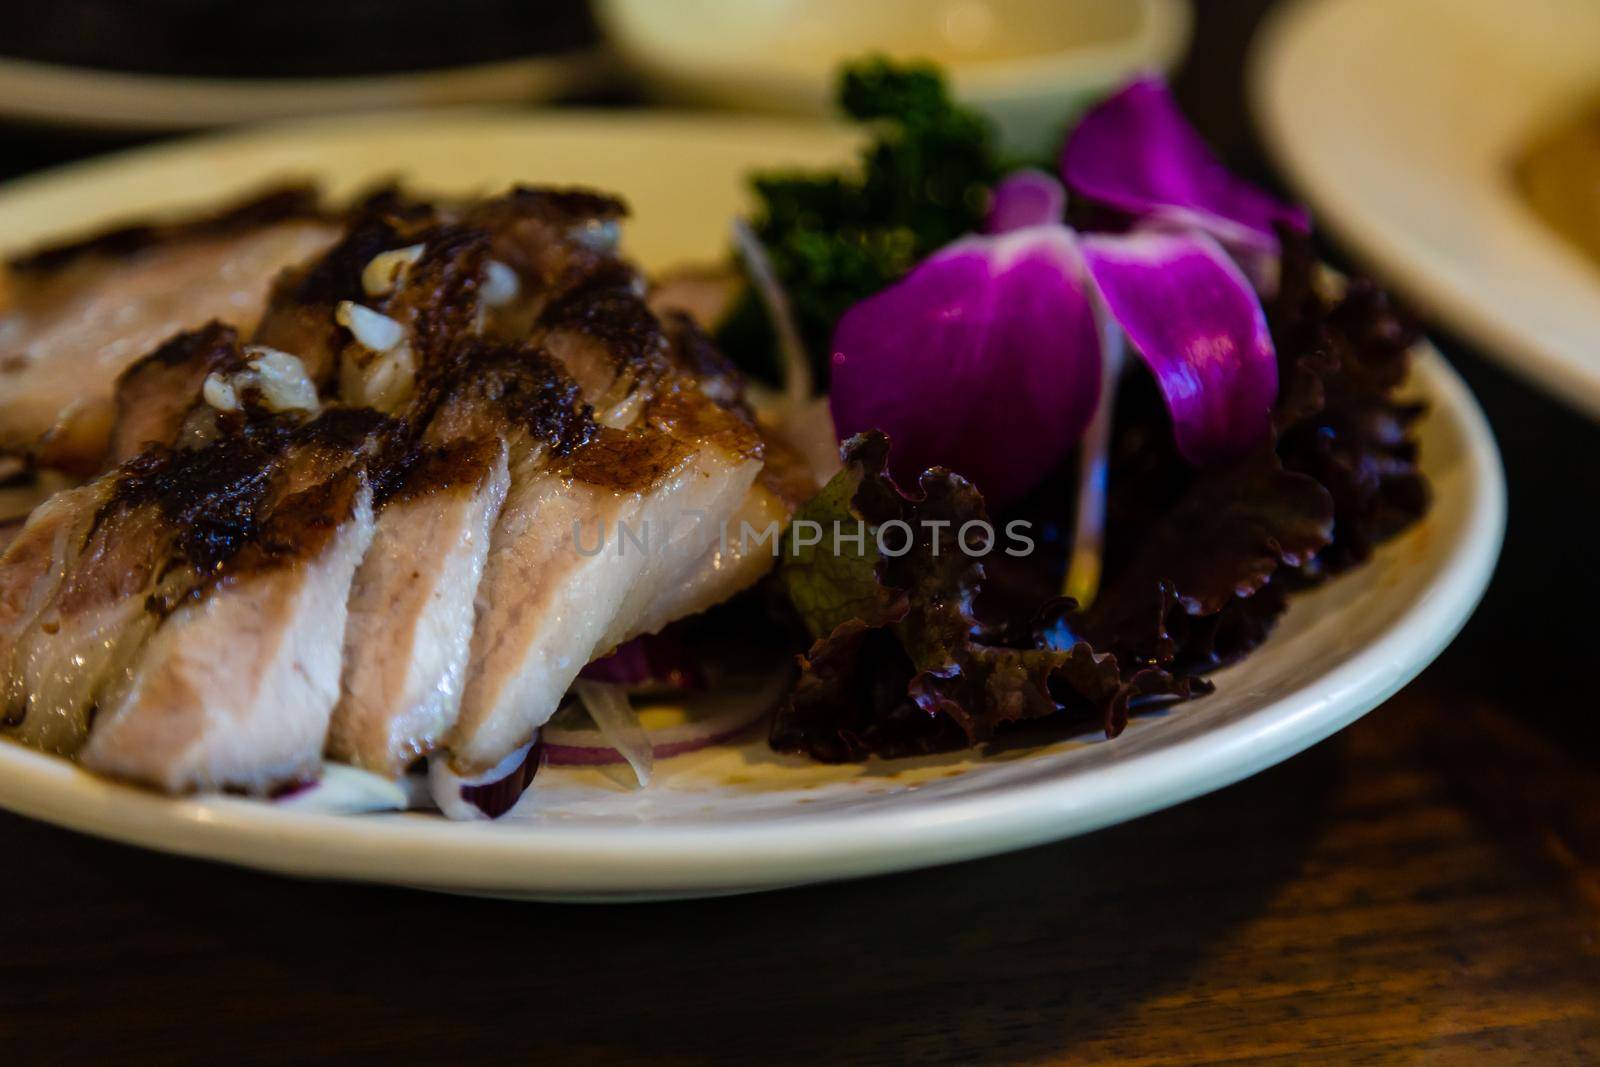 Taiwanese mountain pig with vegetables by imagesbykenny